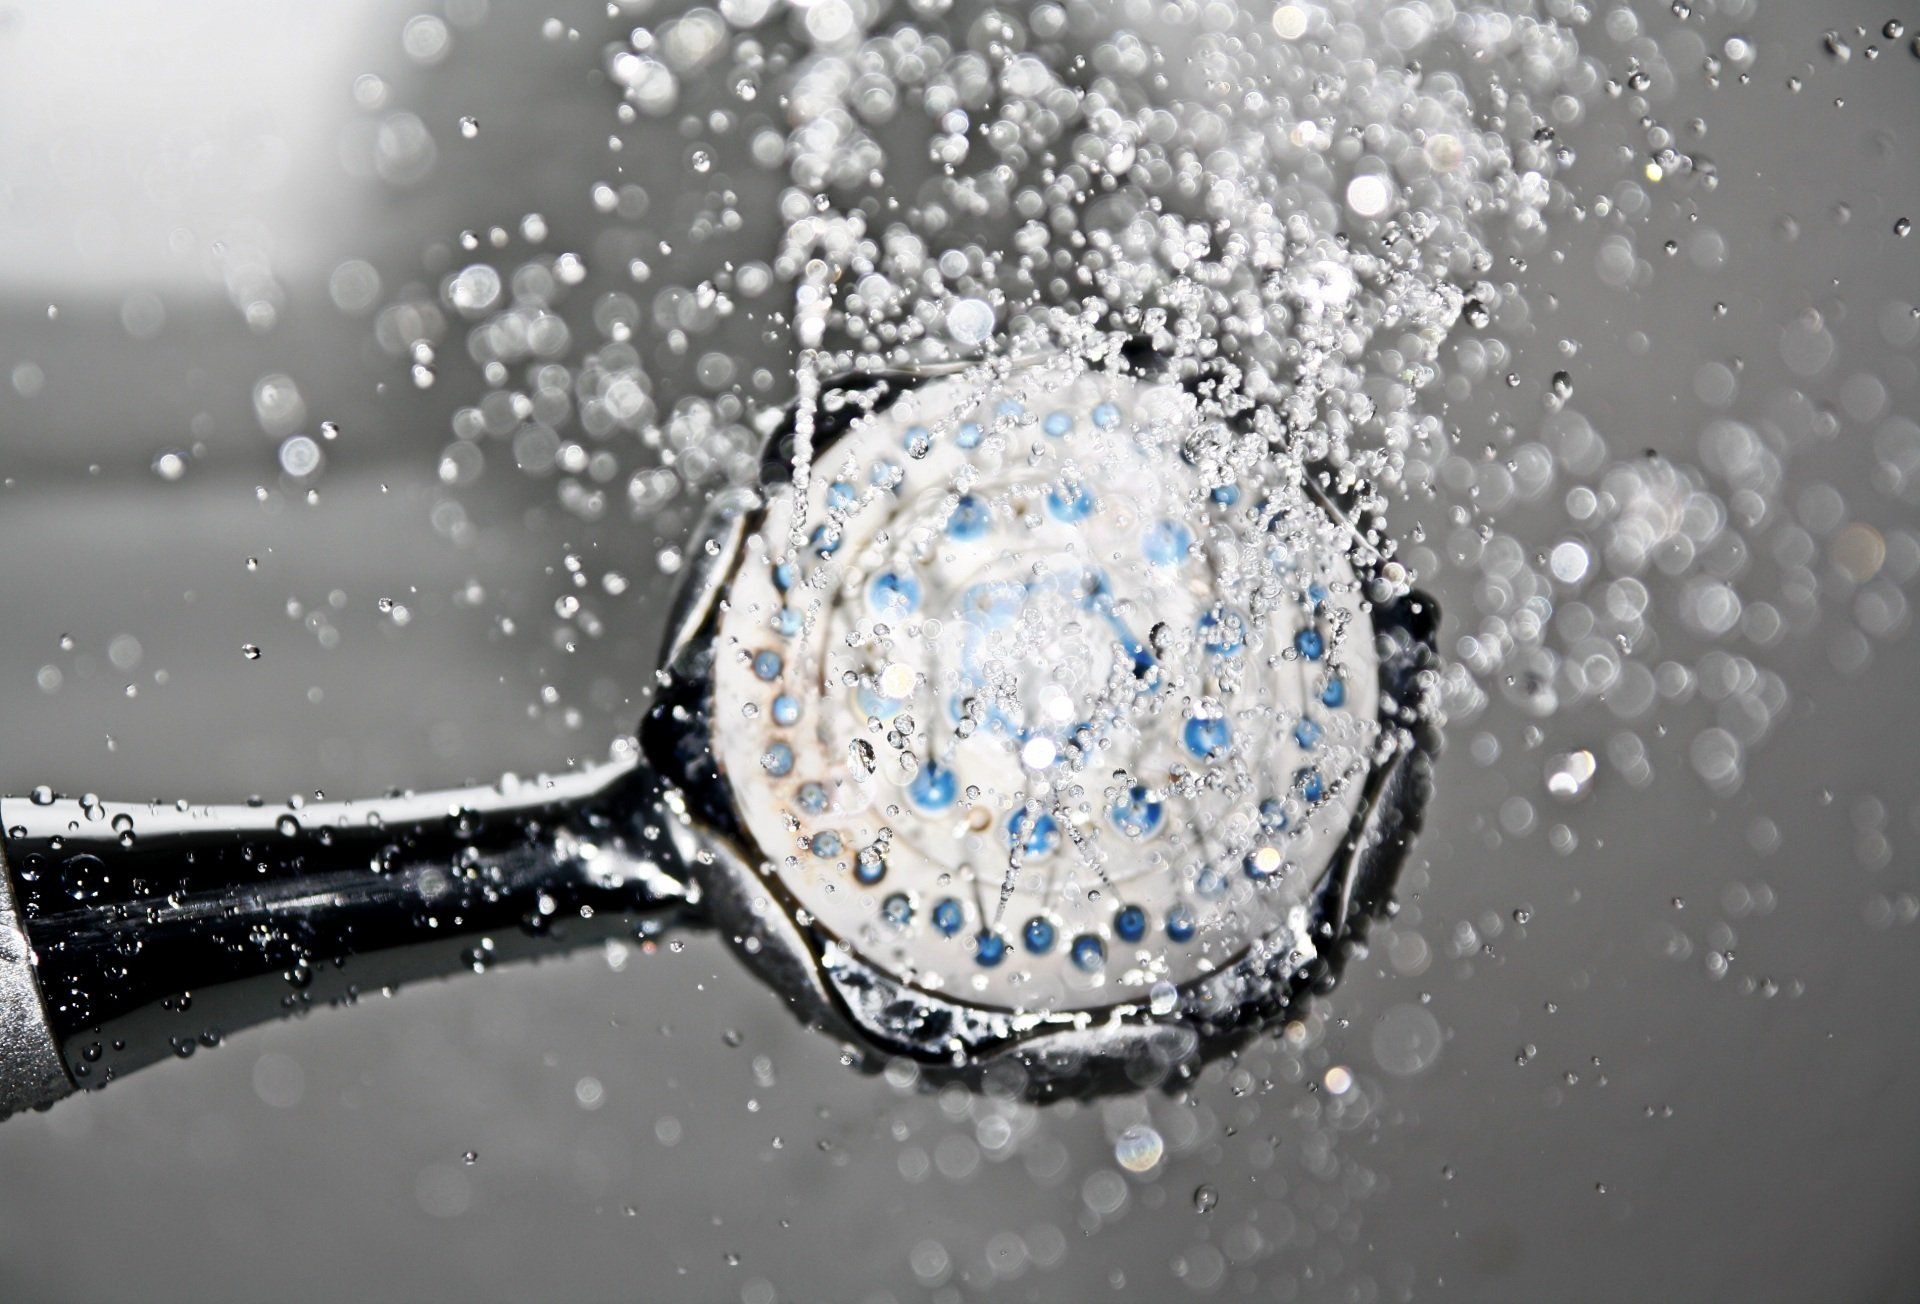 A picture of a shower head releasing water